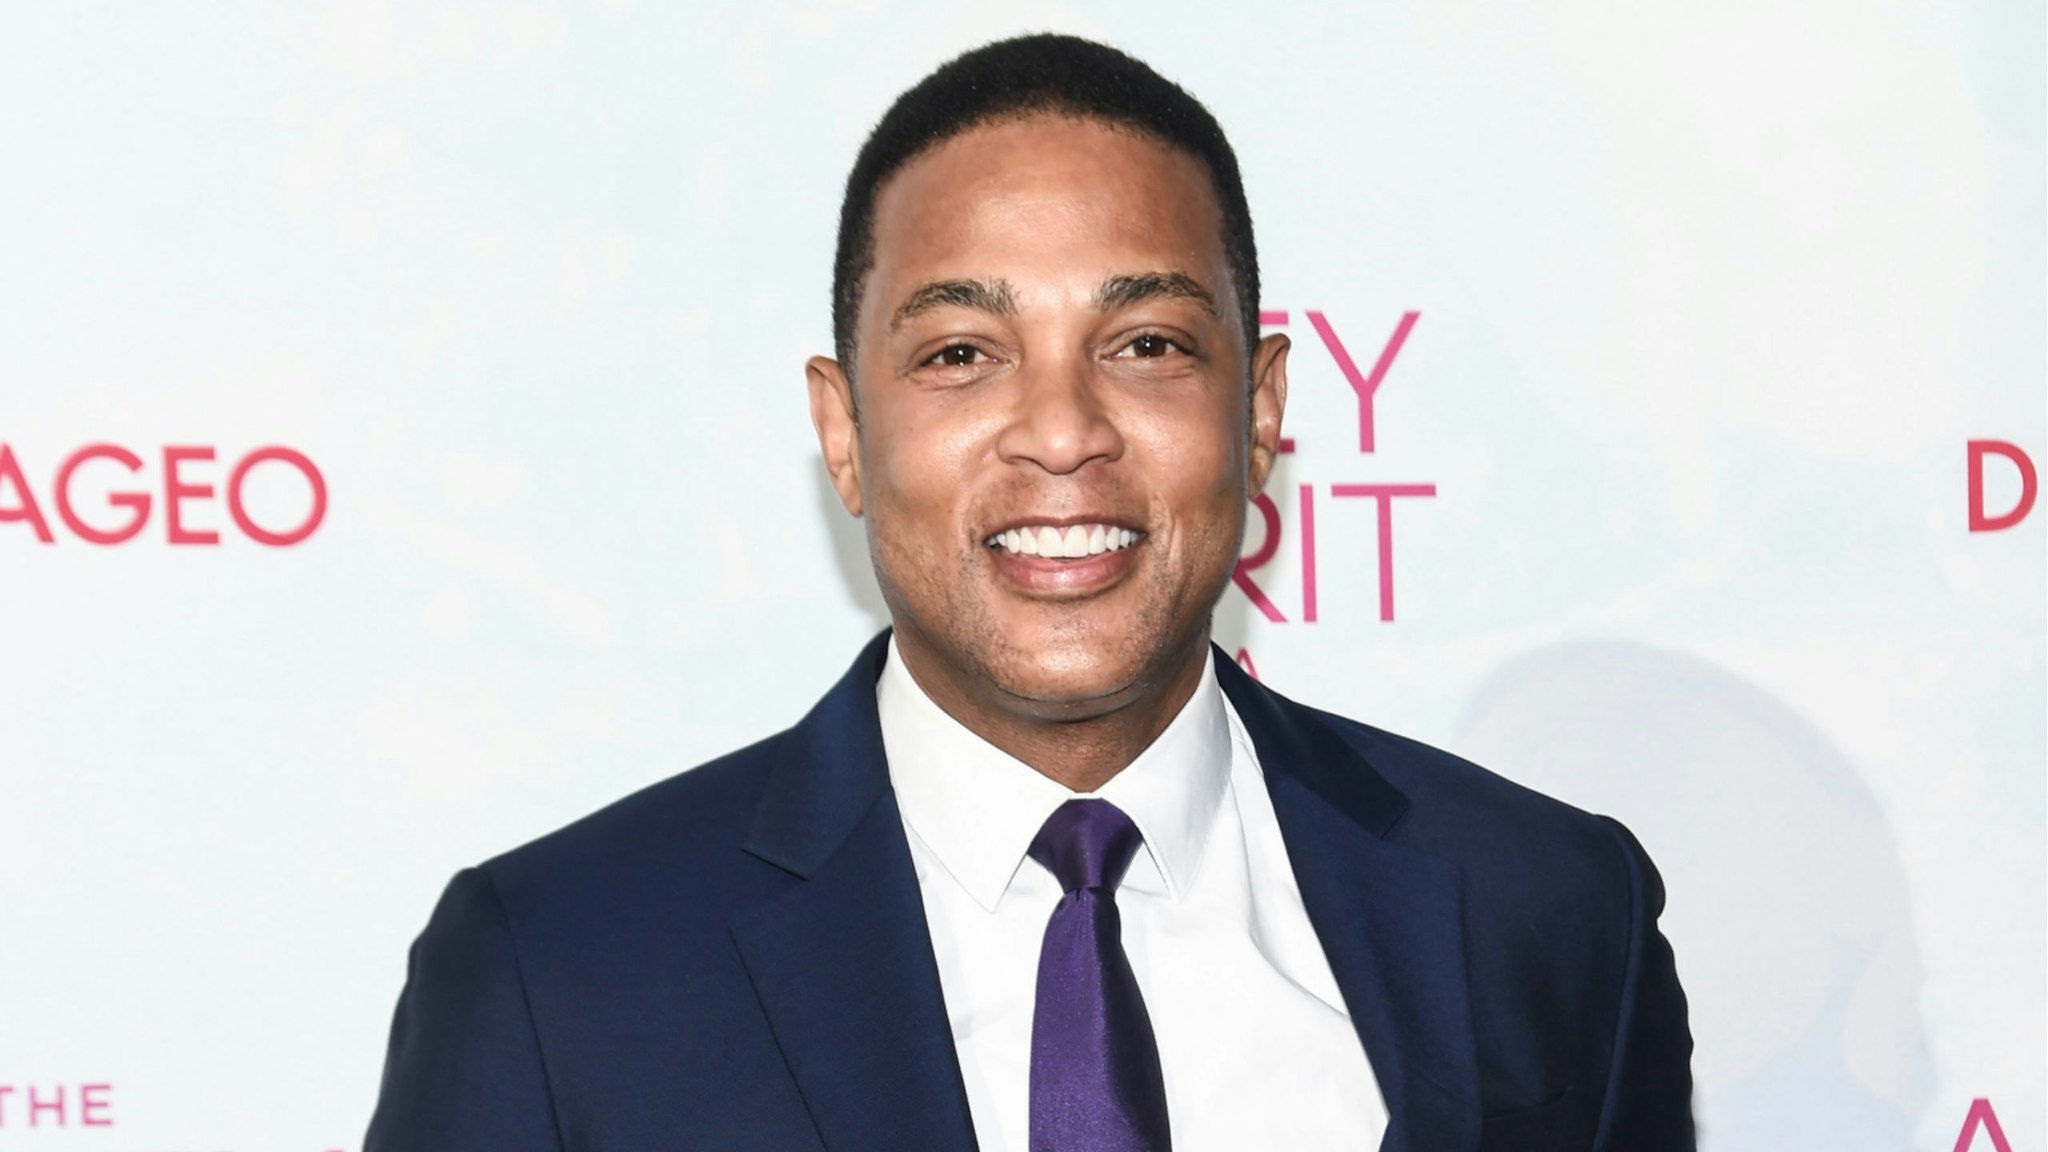 Don Lemon attends the 2018 Ailey Spirit Gala Benefit at David H. Koch Theater at Lincoln Center on June 14, 2018 in New York City.